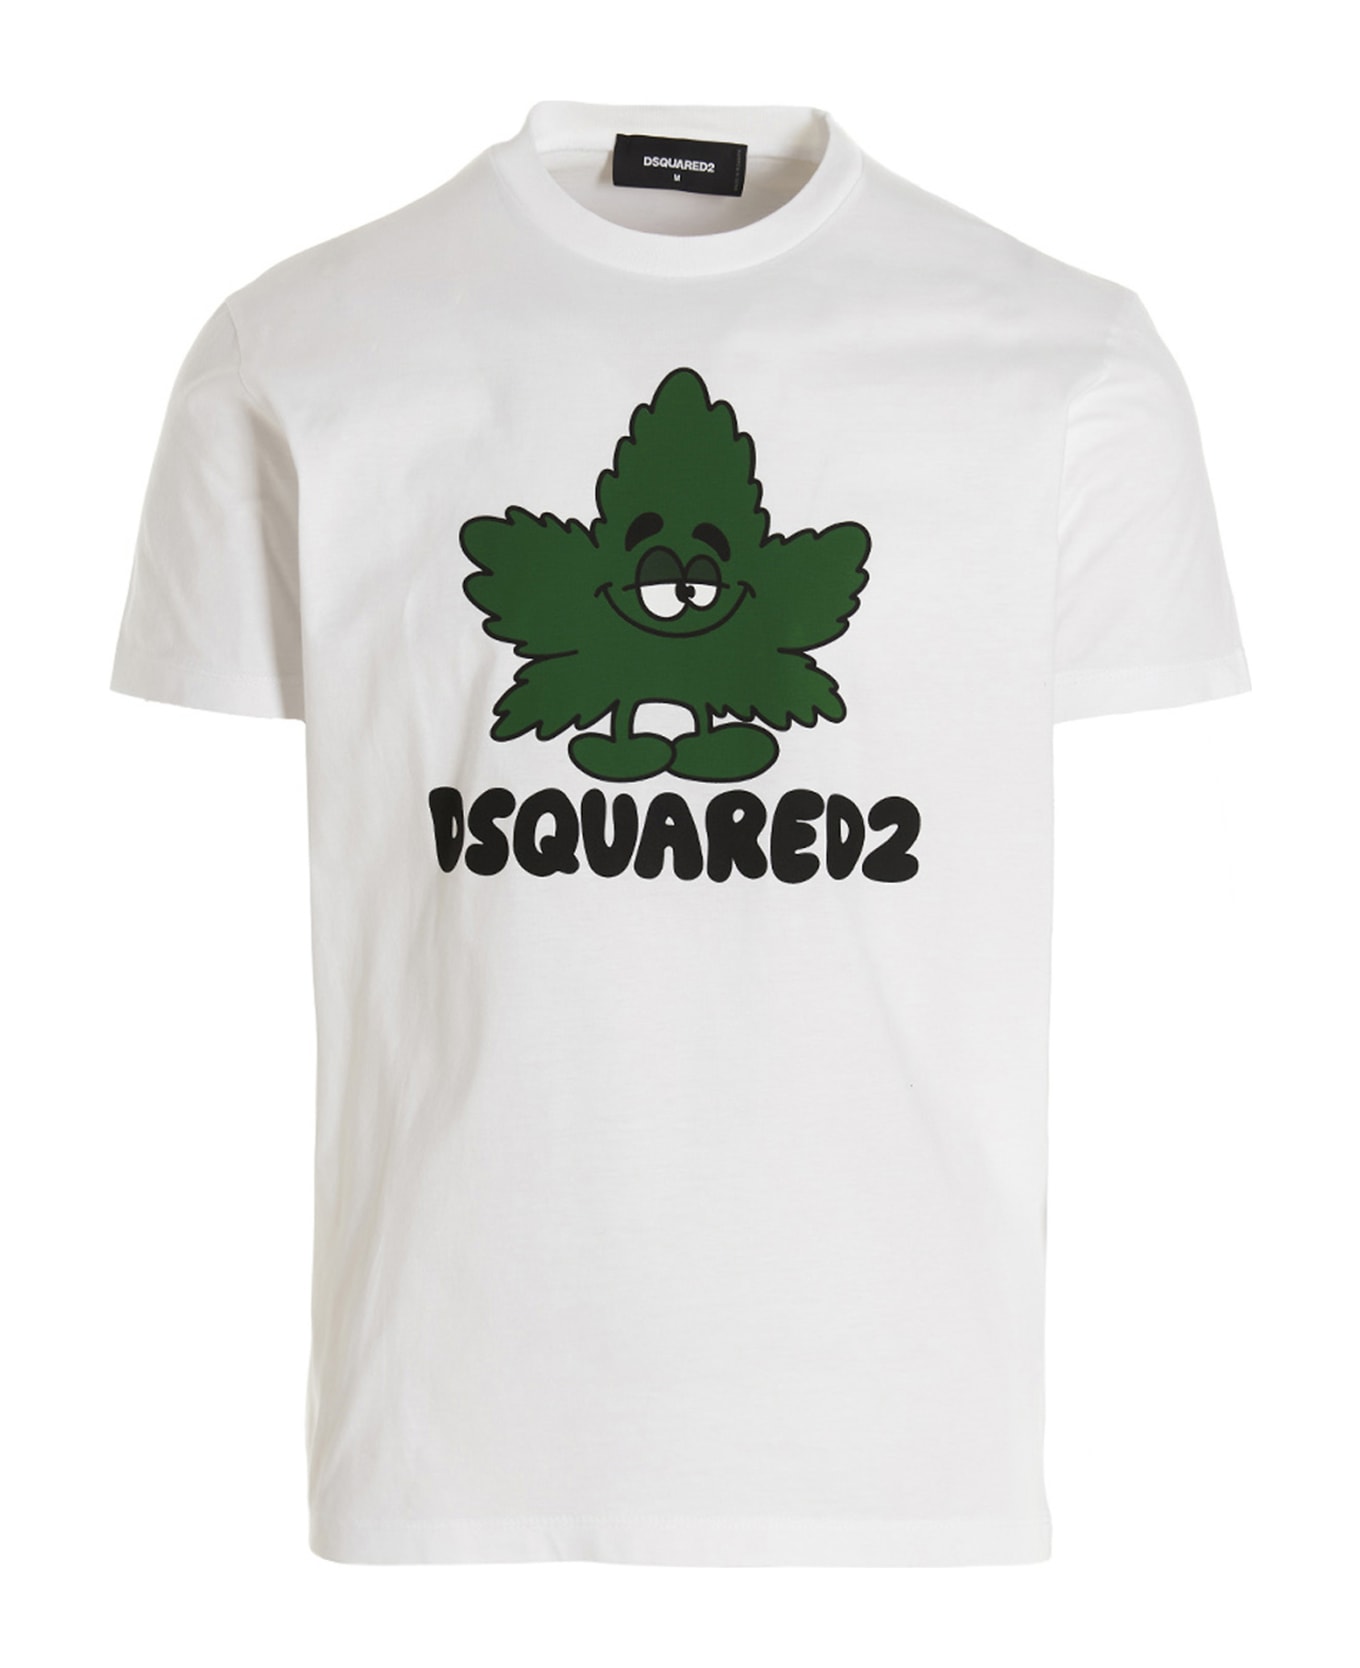 Dsquared2 Cool Fit T-shirt - White